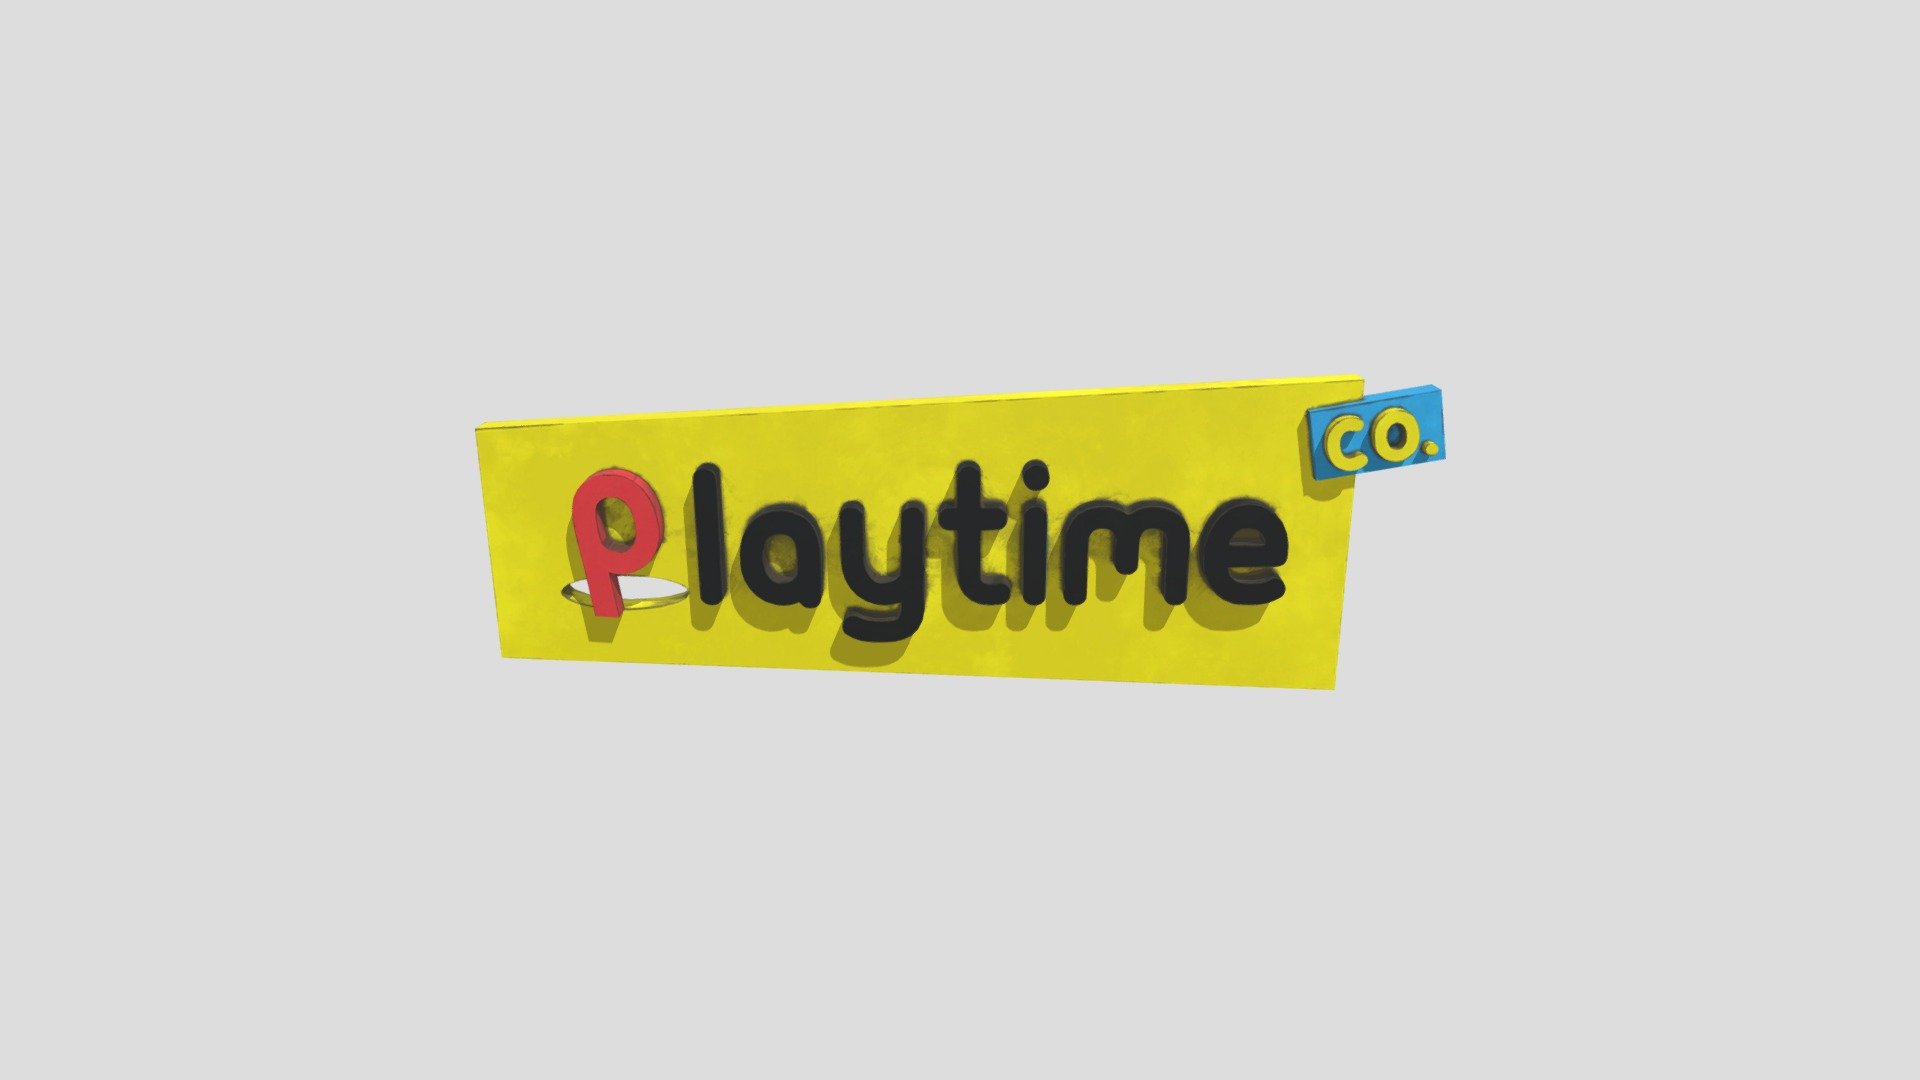 Poppy Playtime - Playtime Co. Logo Sign - Download Free 3D model by  idkjaehh (@idkjaehhi) [53c003e]